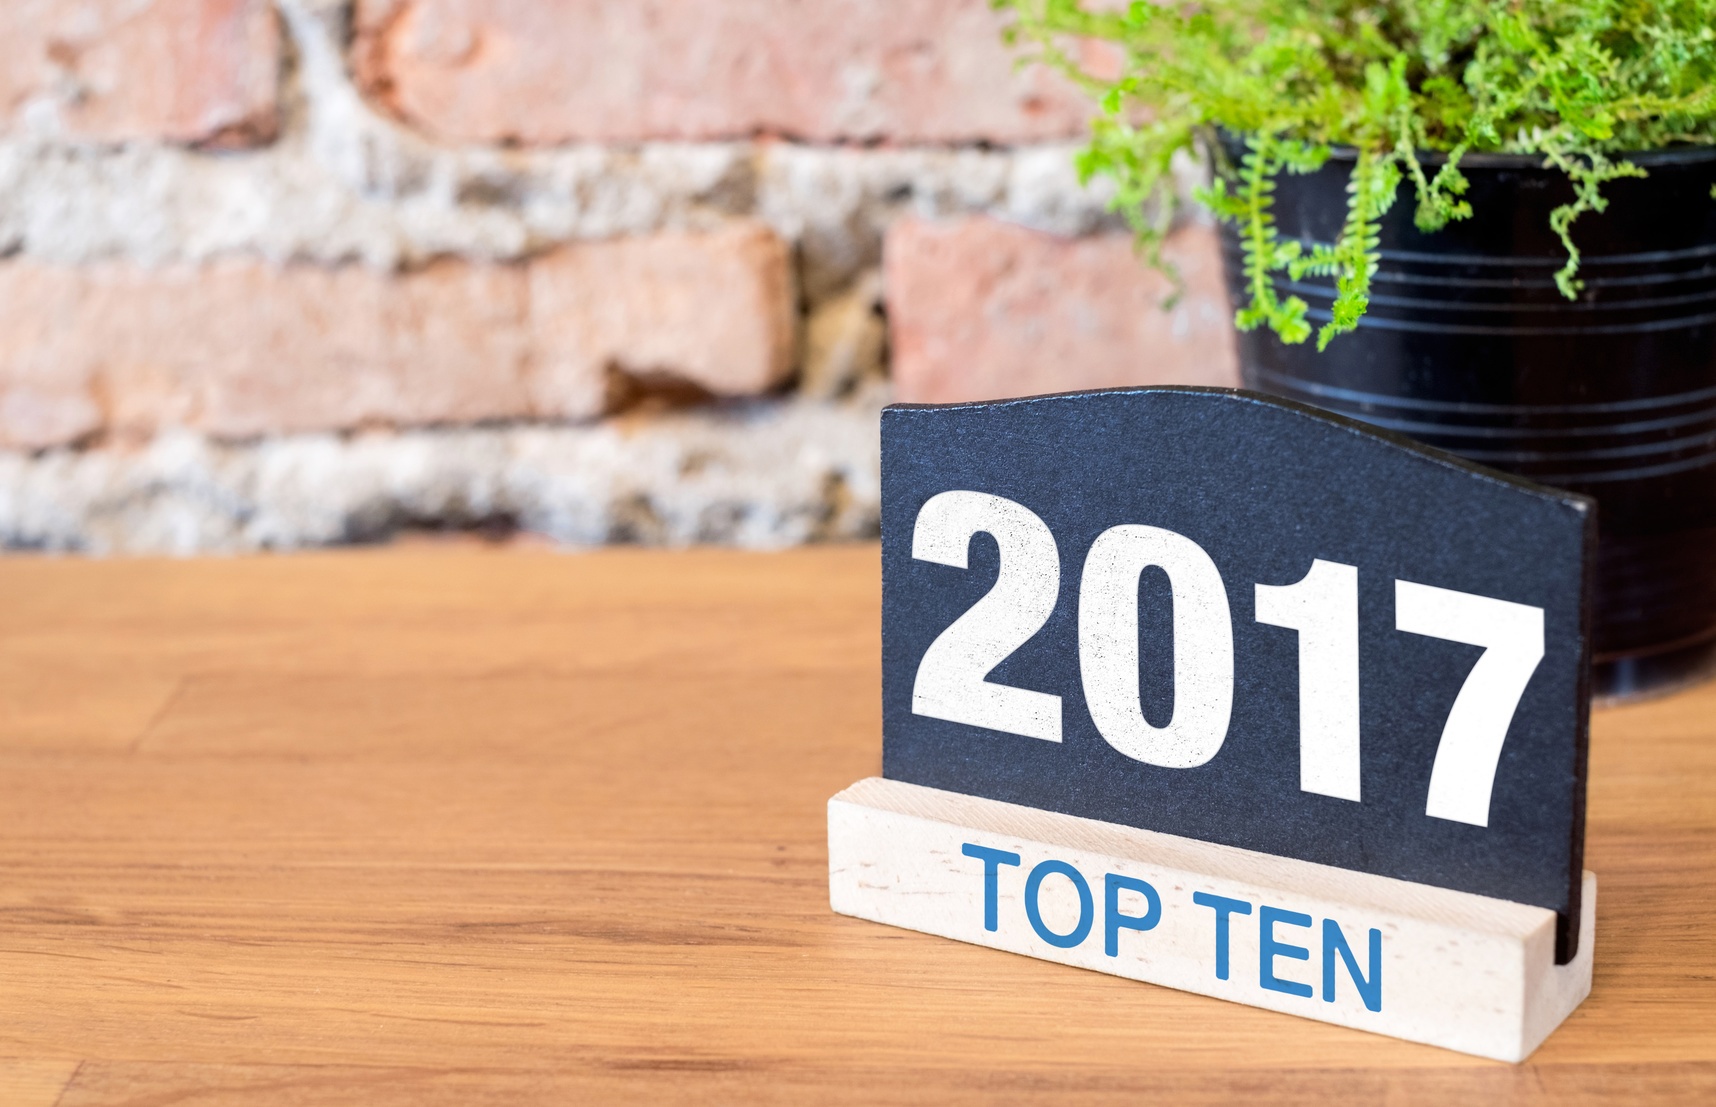 The Top 10 EPM Downloads of 2017